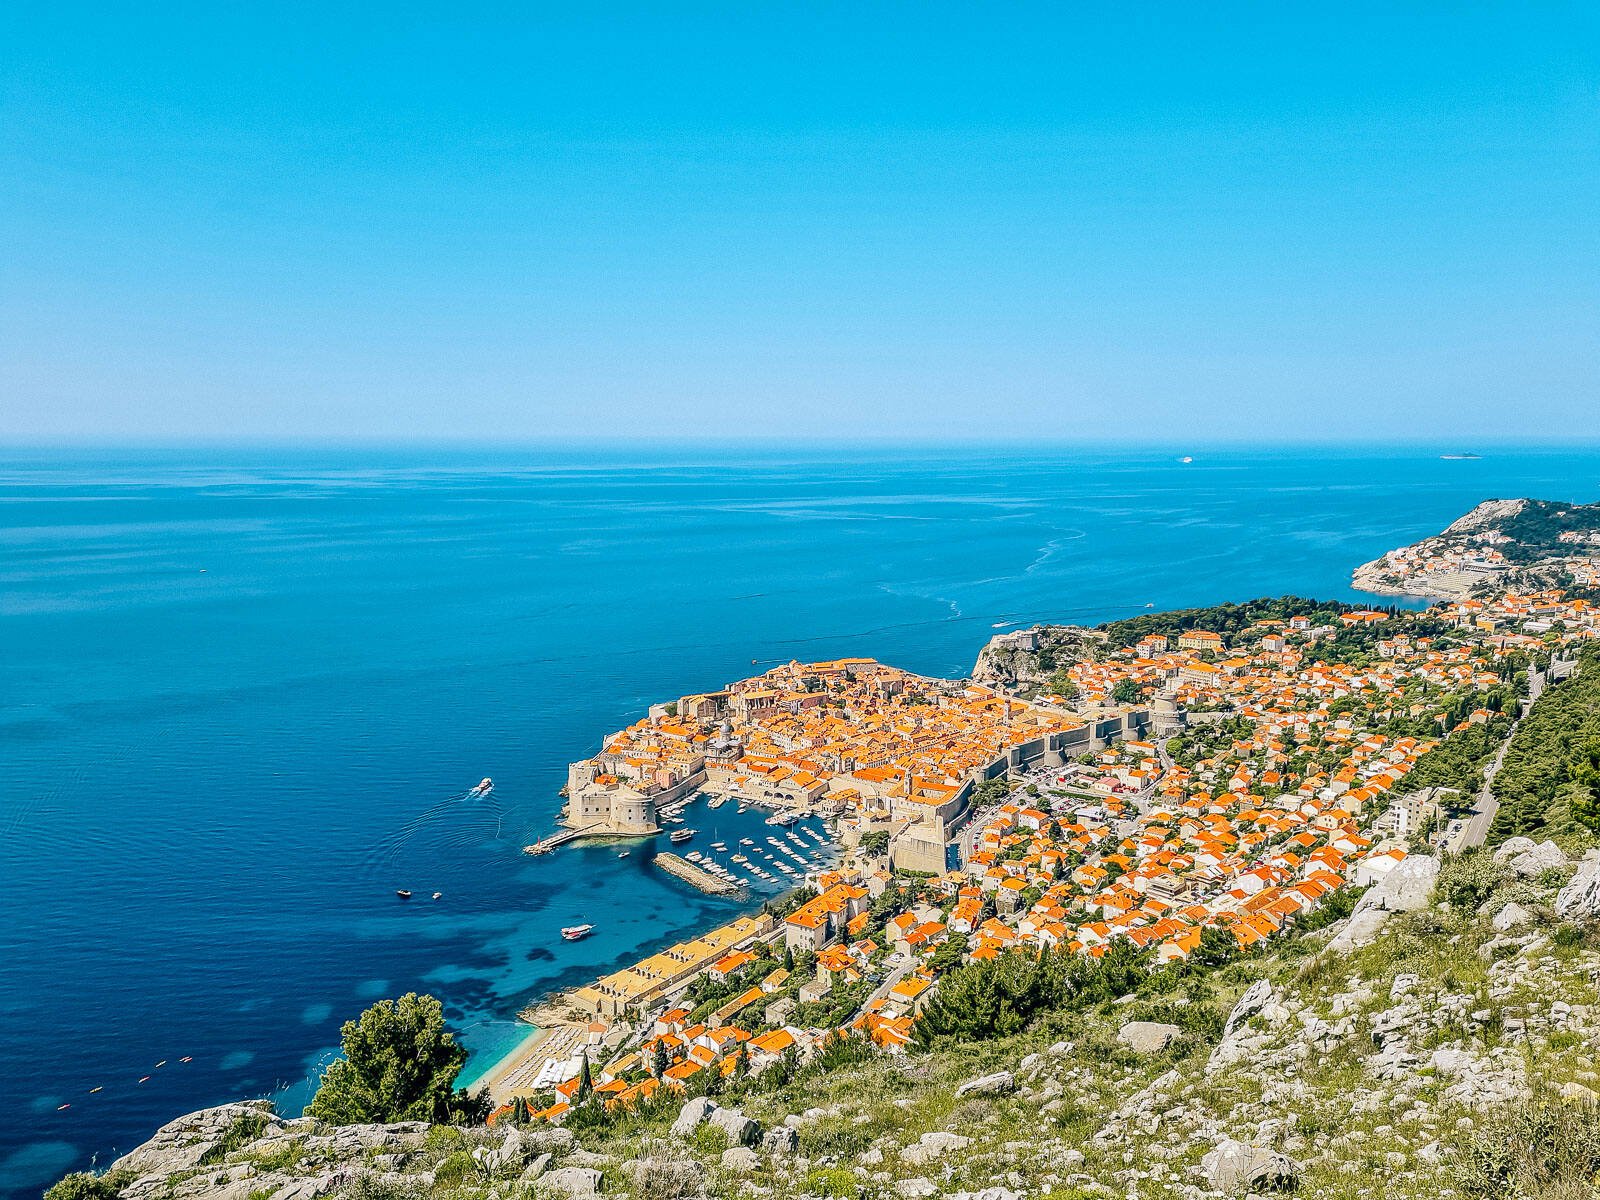 A sunny mountain view looking down on the city of Dubrovnik and talking about croatia travel tip for the best time to visit Dubrovnik